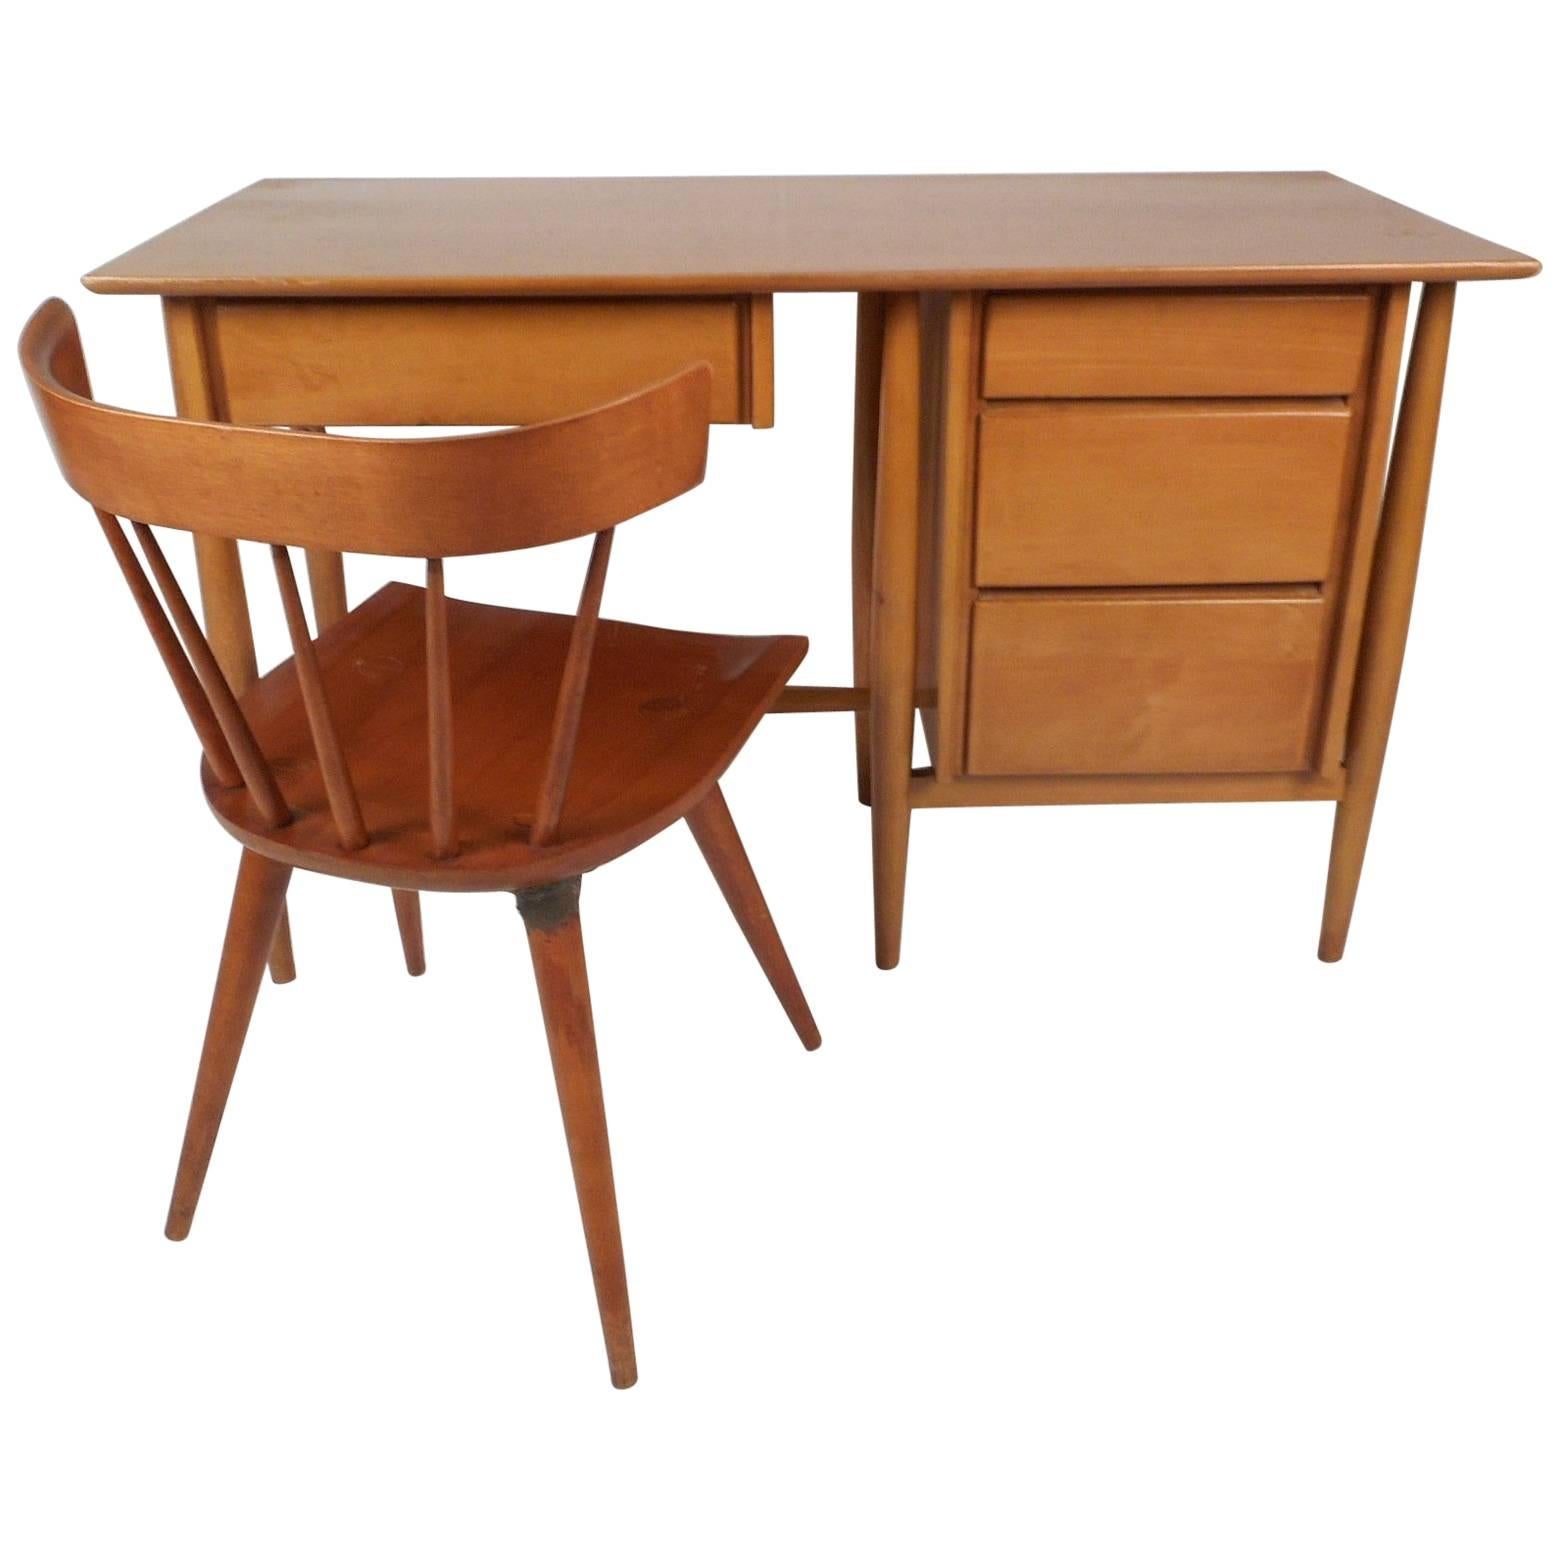 Mid-Century Modern Desk and Chair by Paul McCobb